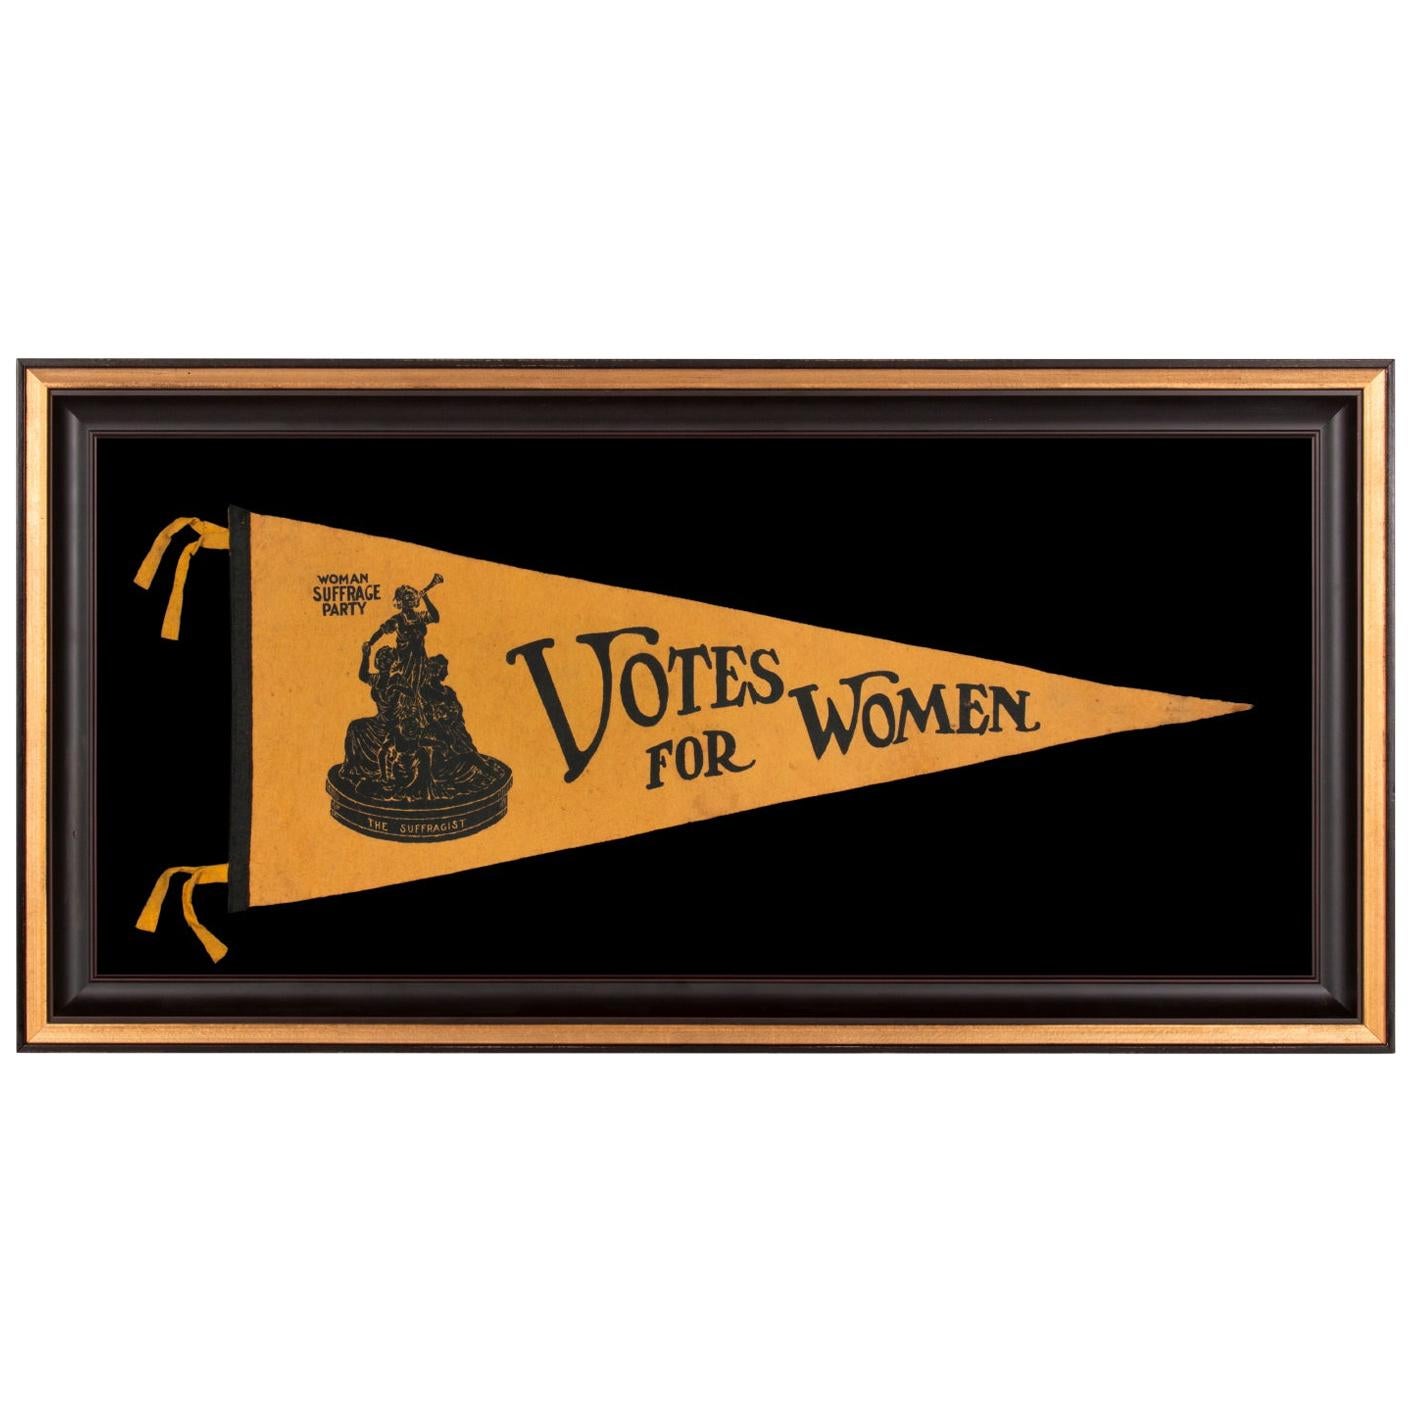 "Votes for Women" Pennant with Image of Statuette "Suffragist" by Ella Buchanan